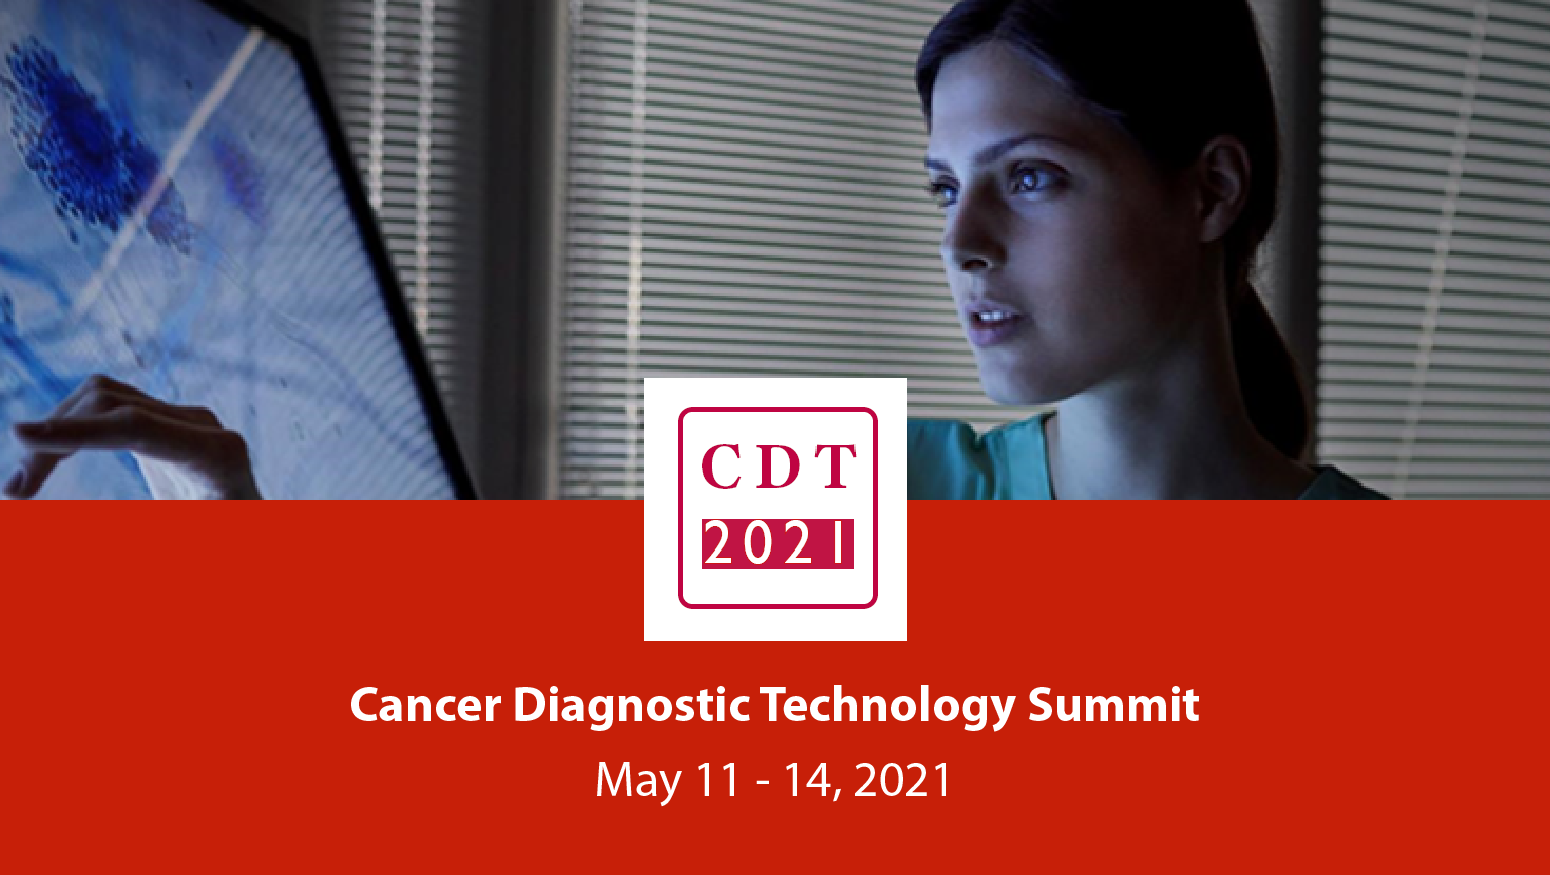 Cancer Diagnostic Technology Summit 2021